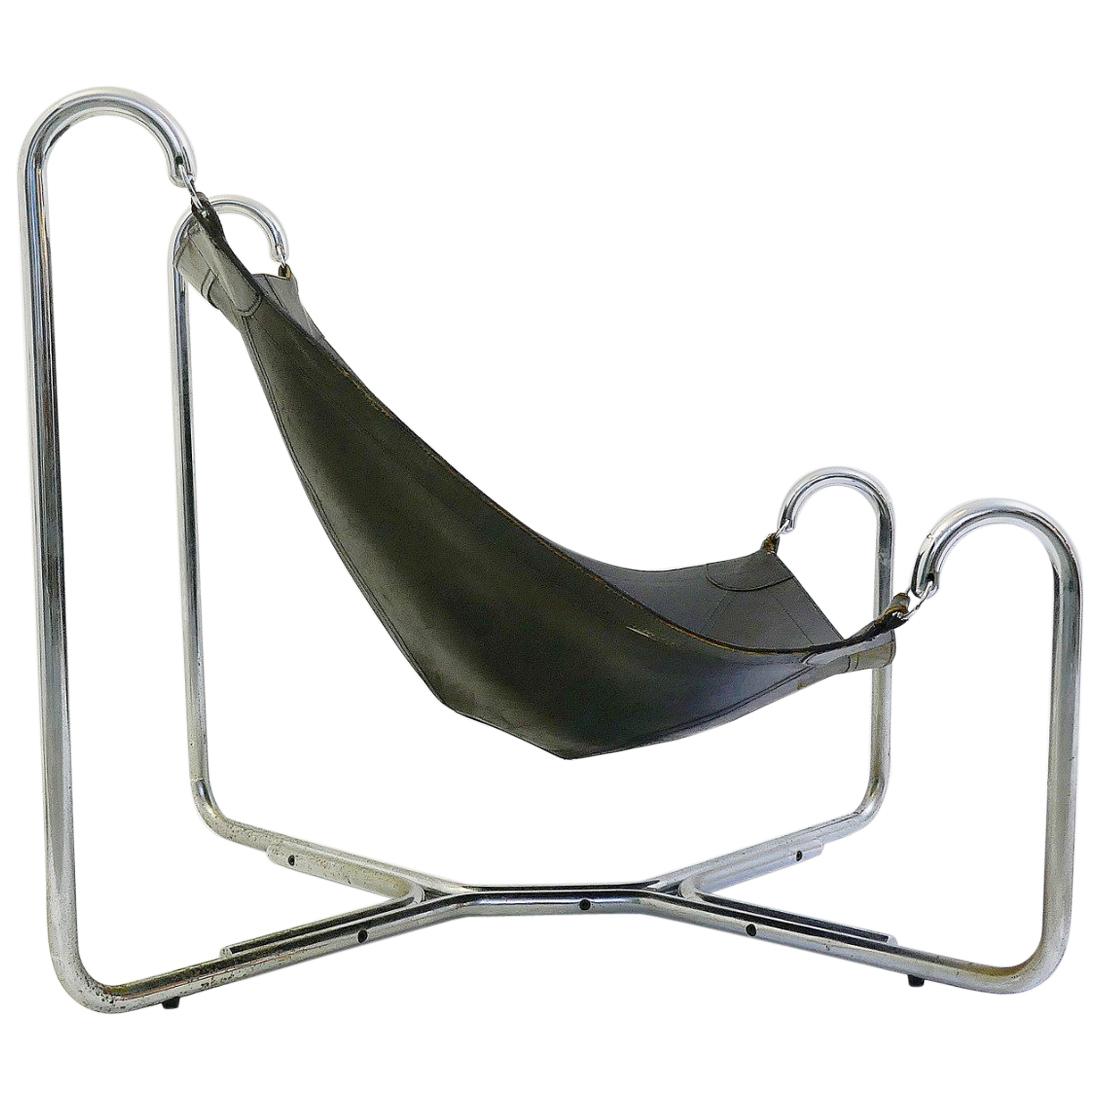 "Baffo" Chair by Gianni Pareschi and Ezio Didone for Busnelli, Italy, 1969